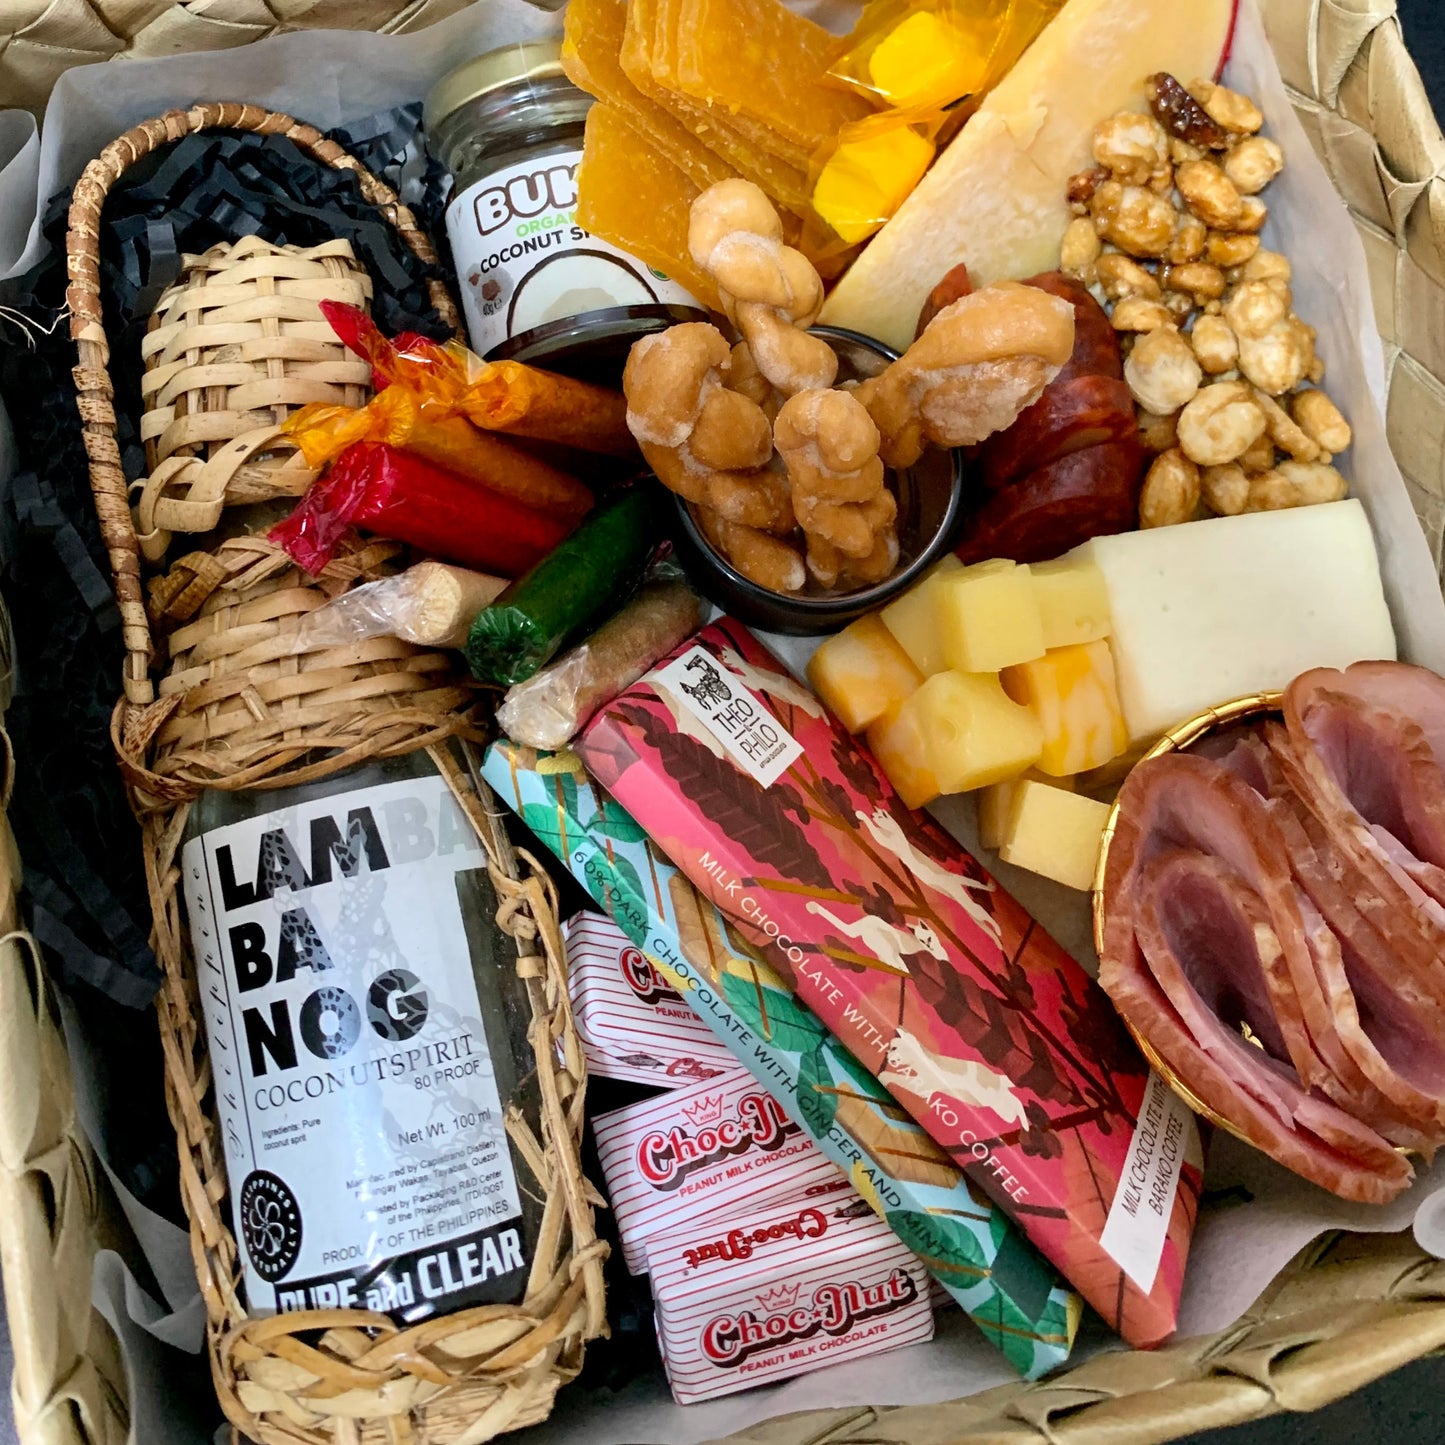 Grazing box with cheeses, cold cuts, fruits, nuts, and other treats